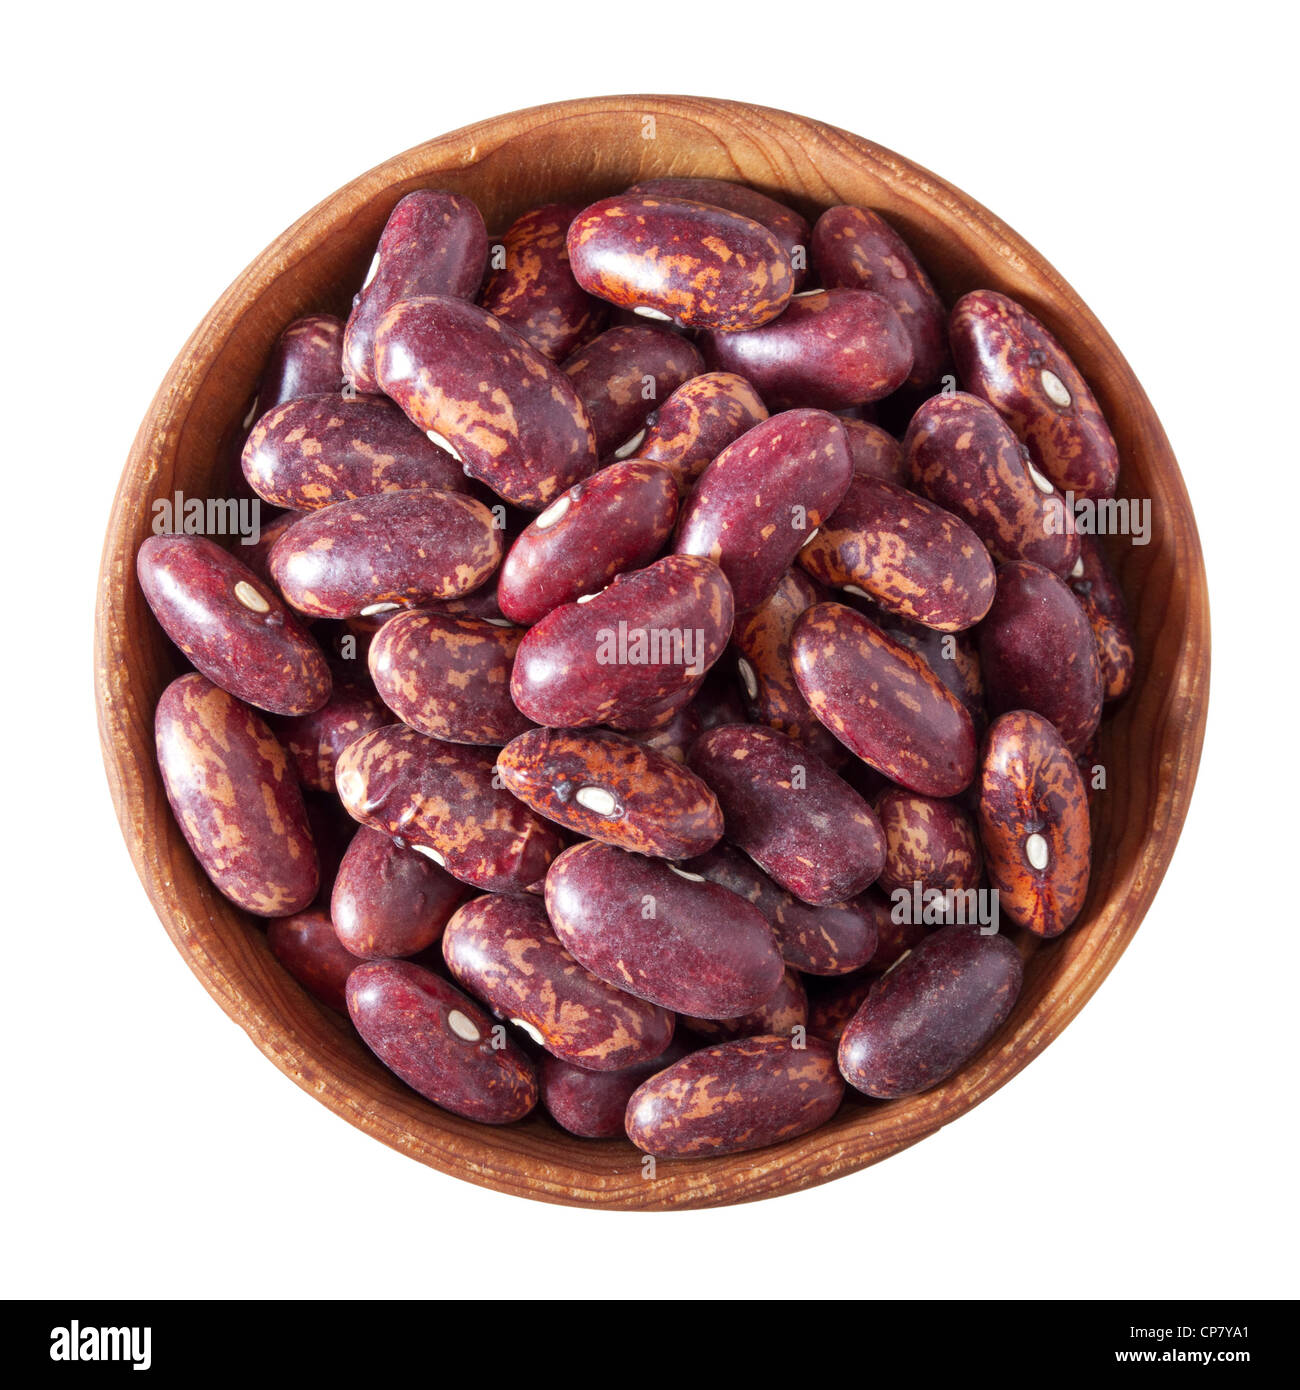 wooden bowl full of red speckled kidney beans isolated on white background Stock Photo